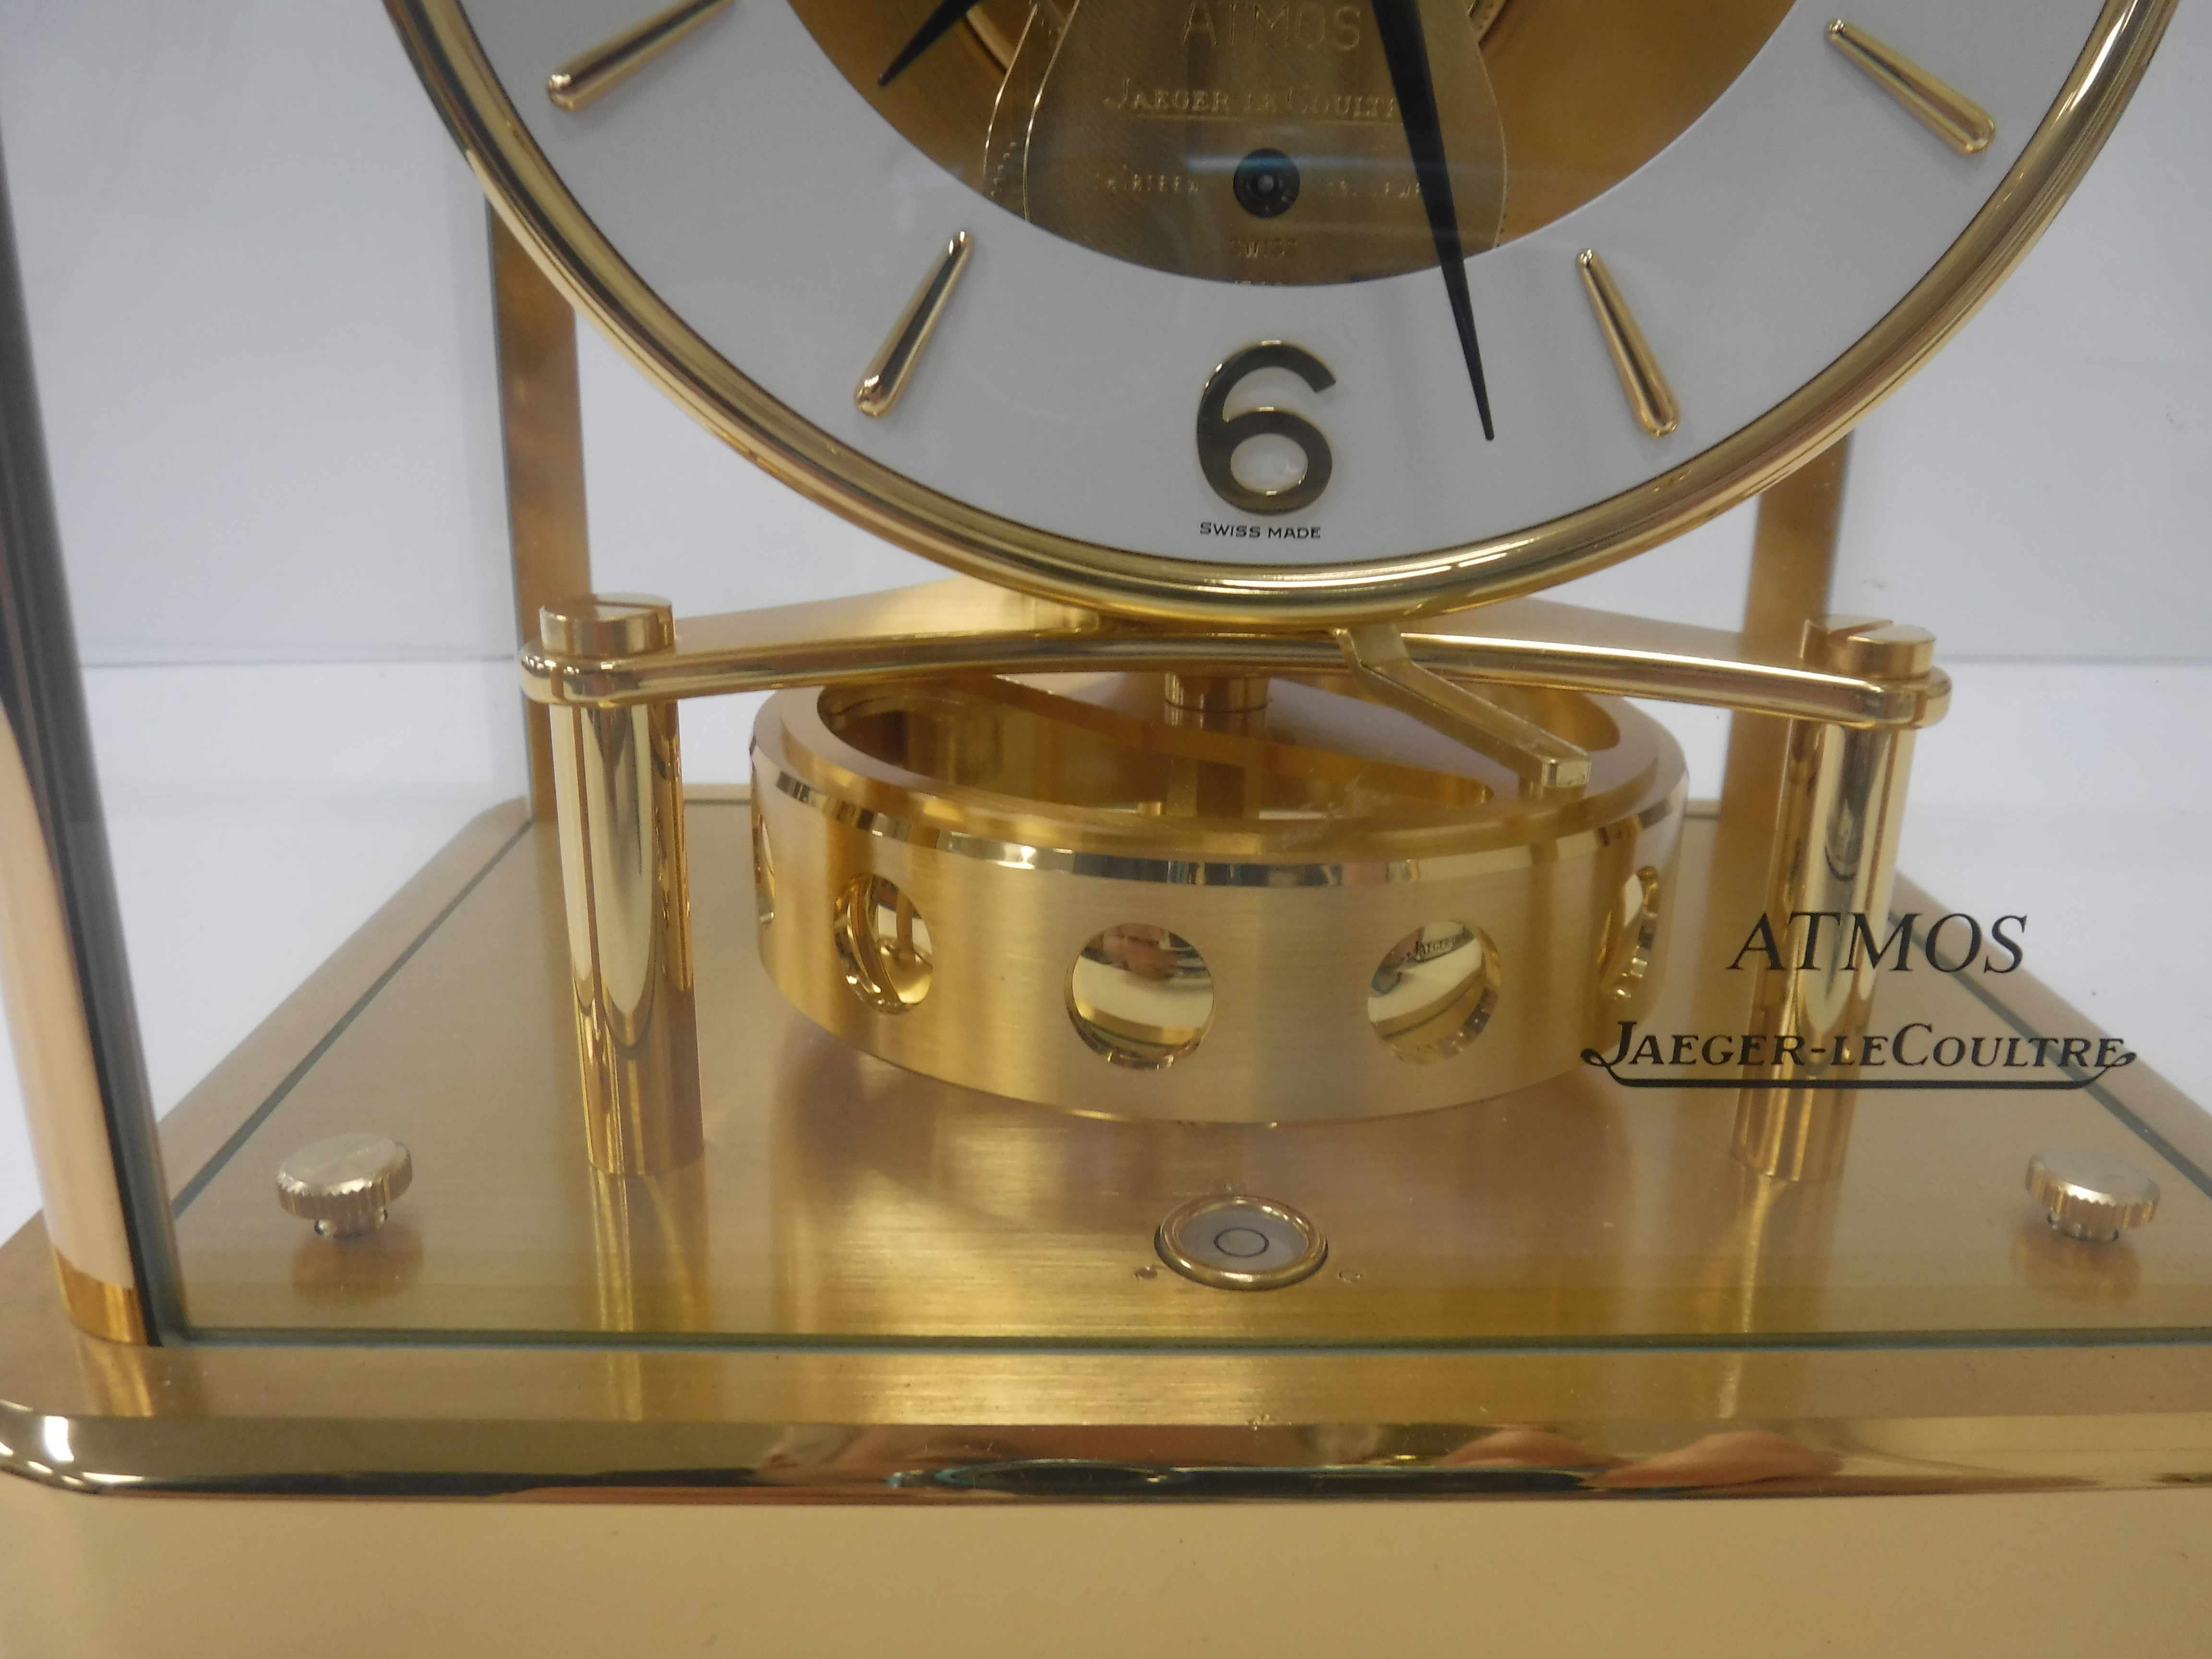 A Jaeger-le-Coultre "Atmos" clock, the m - Image 8 of 10